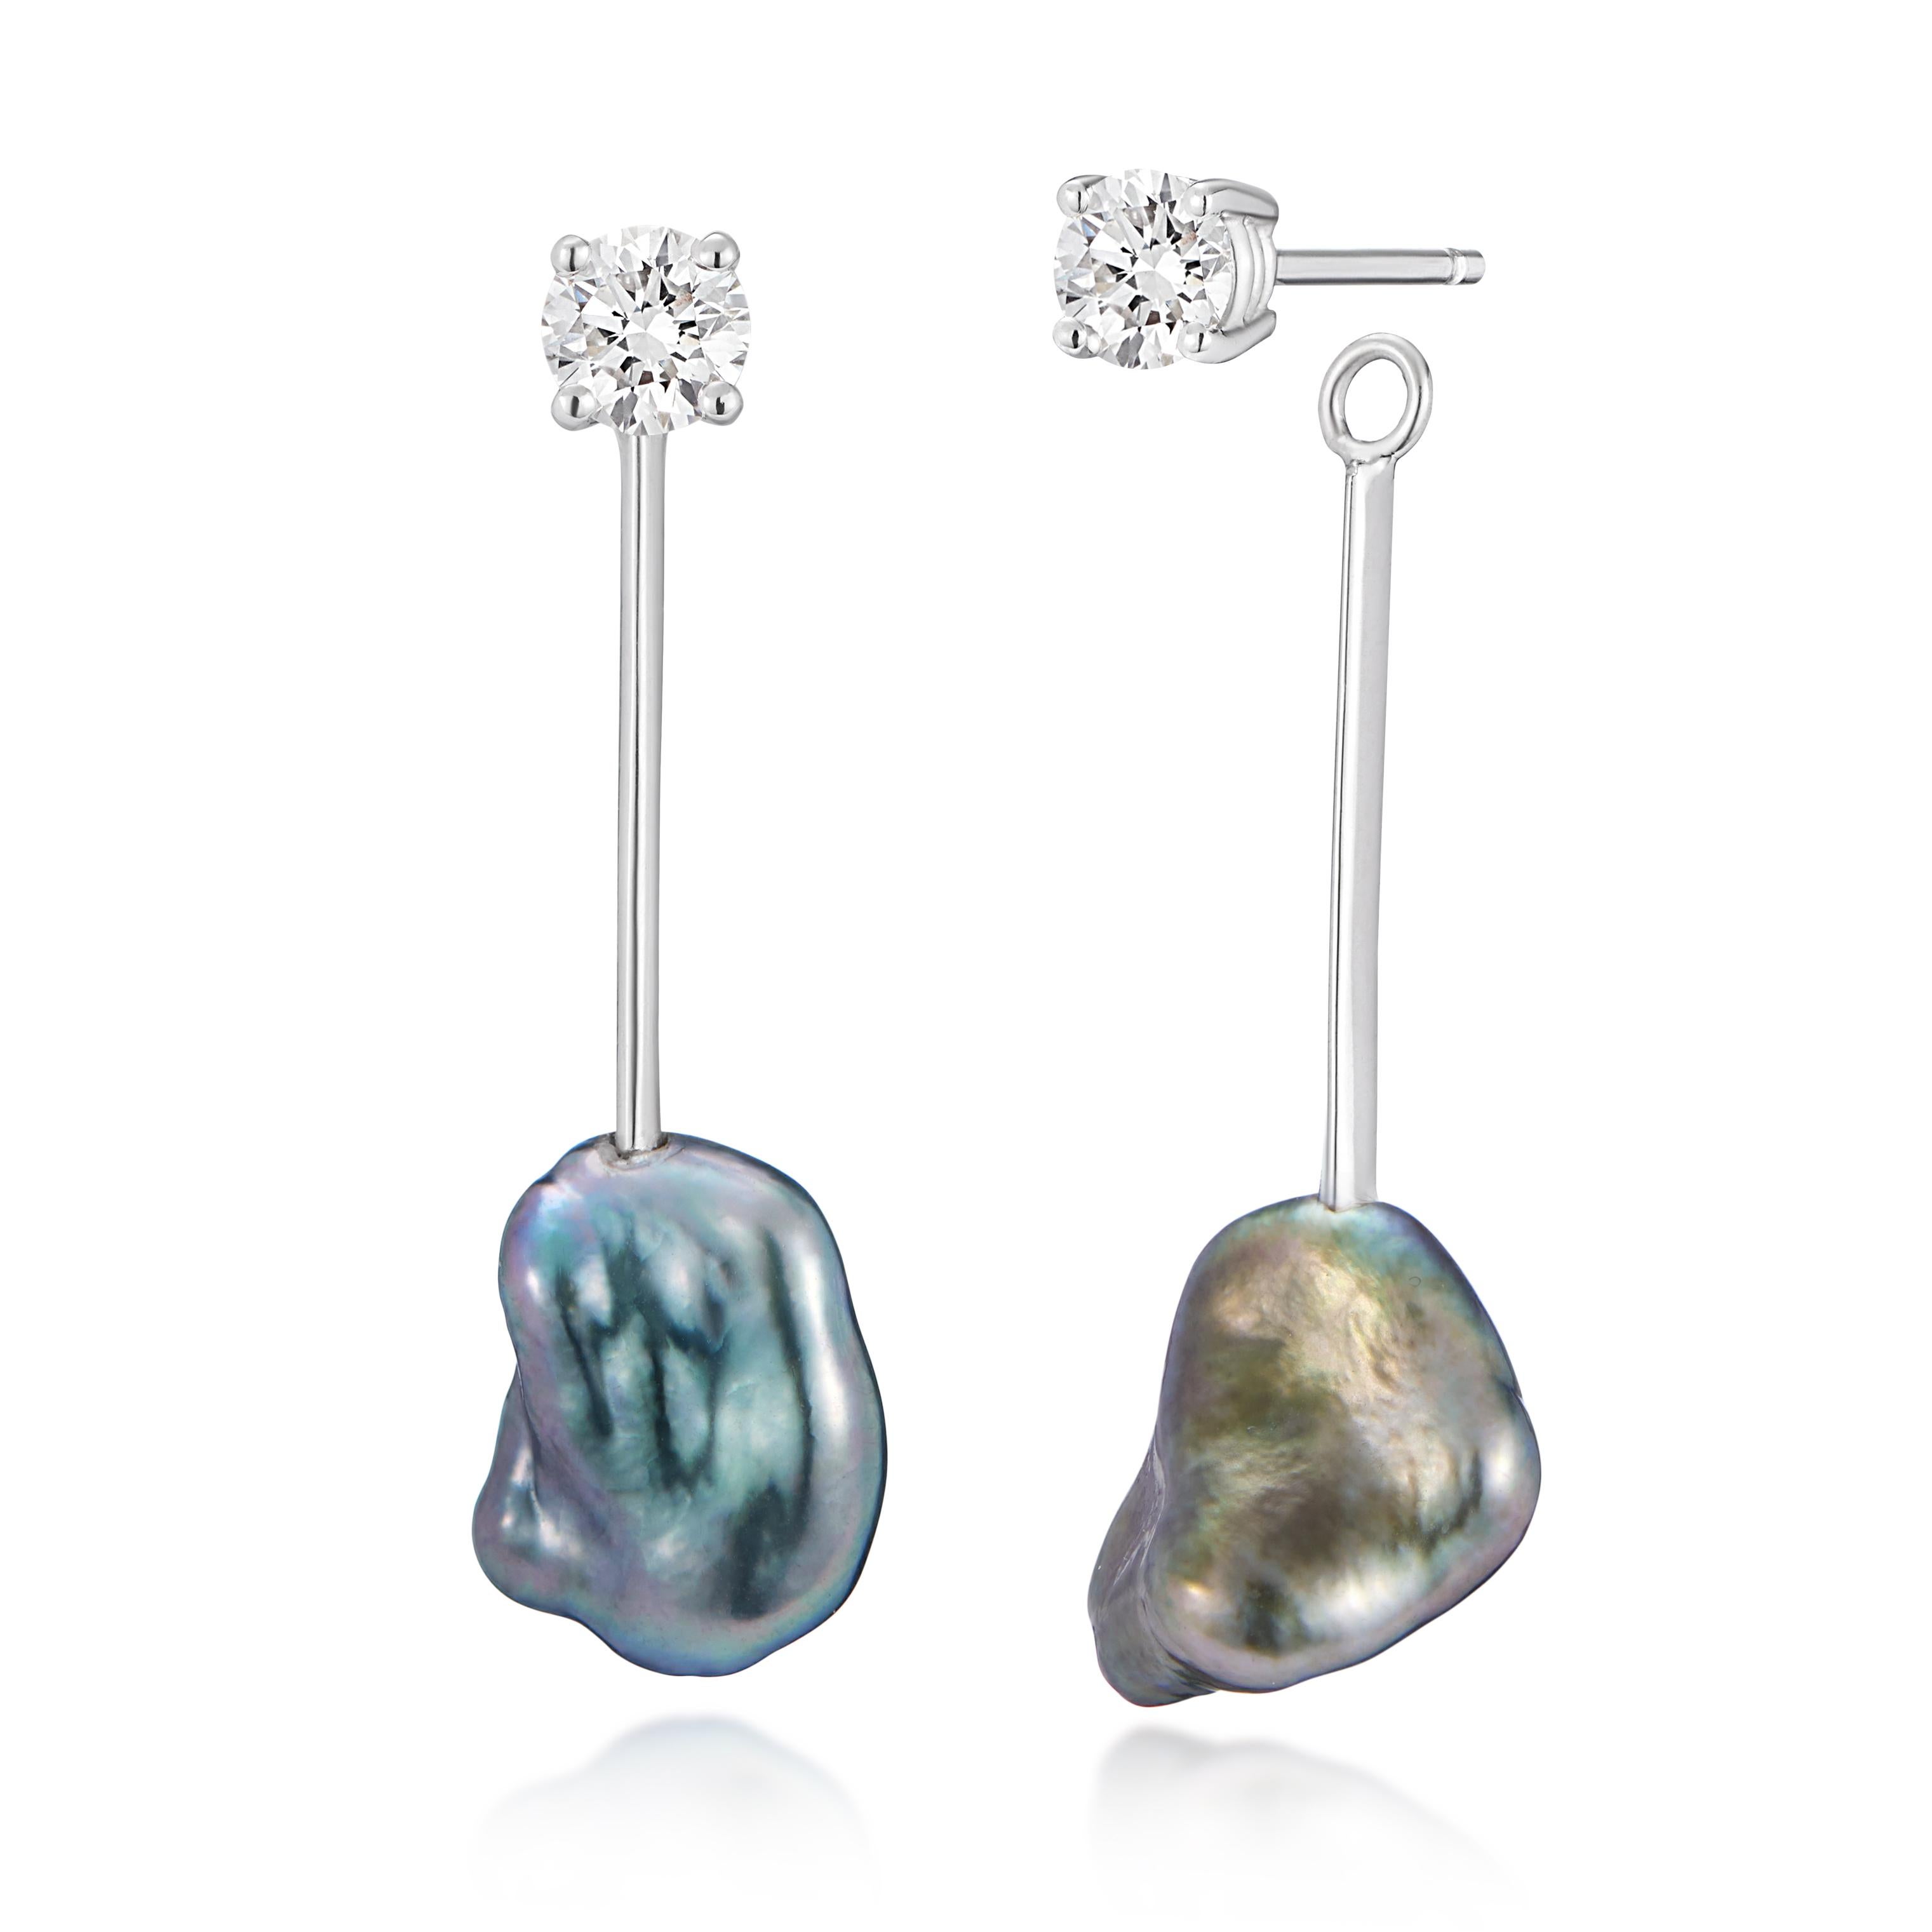 2 in 1 earrings - A pair of .5 Carat white diamond studs set in platinum with removable grey Keshi pearl drops also set in platinum. These earrings will take you from day to night and add that extra bit of sparkle to any outfit. 1 of the Keshi